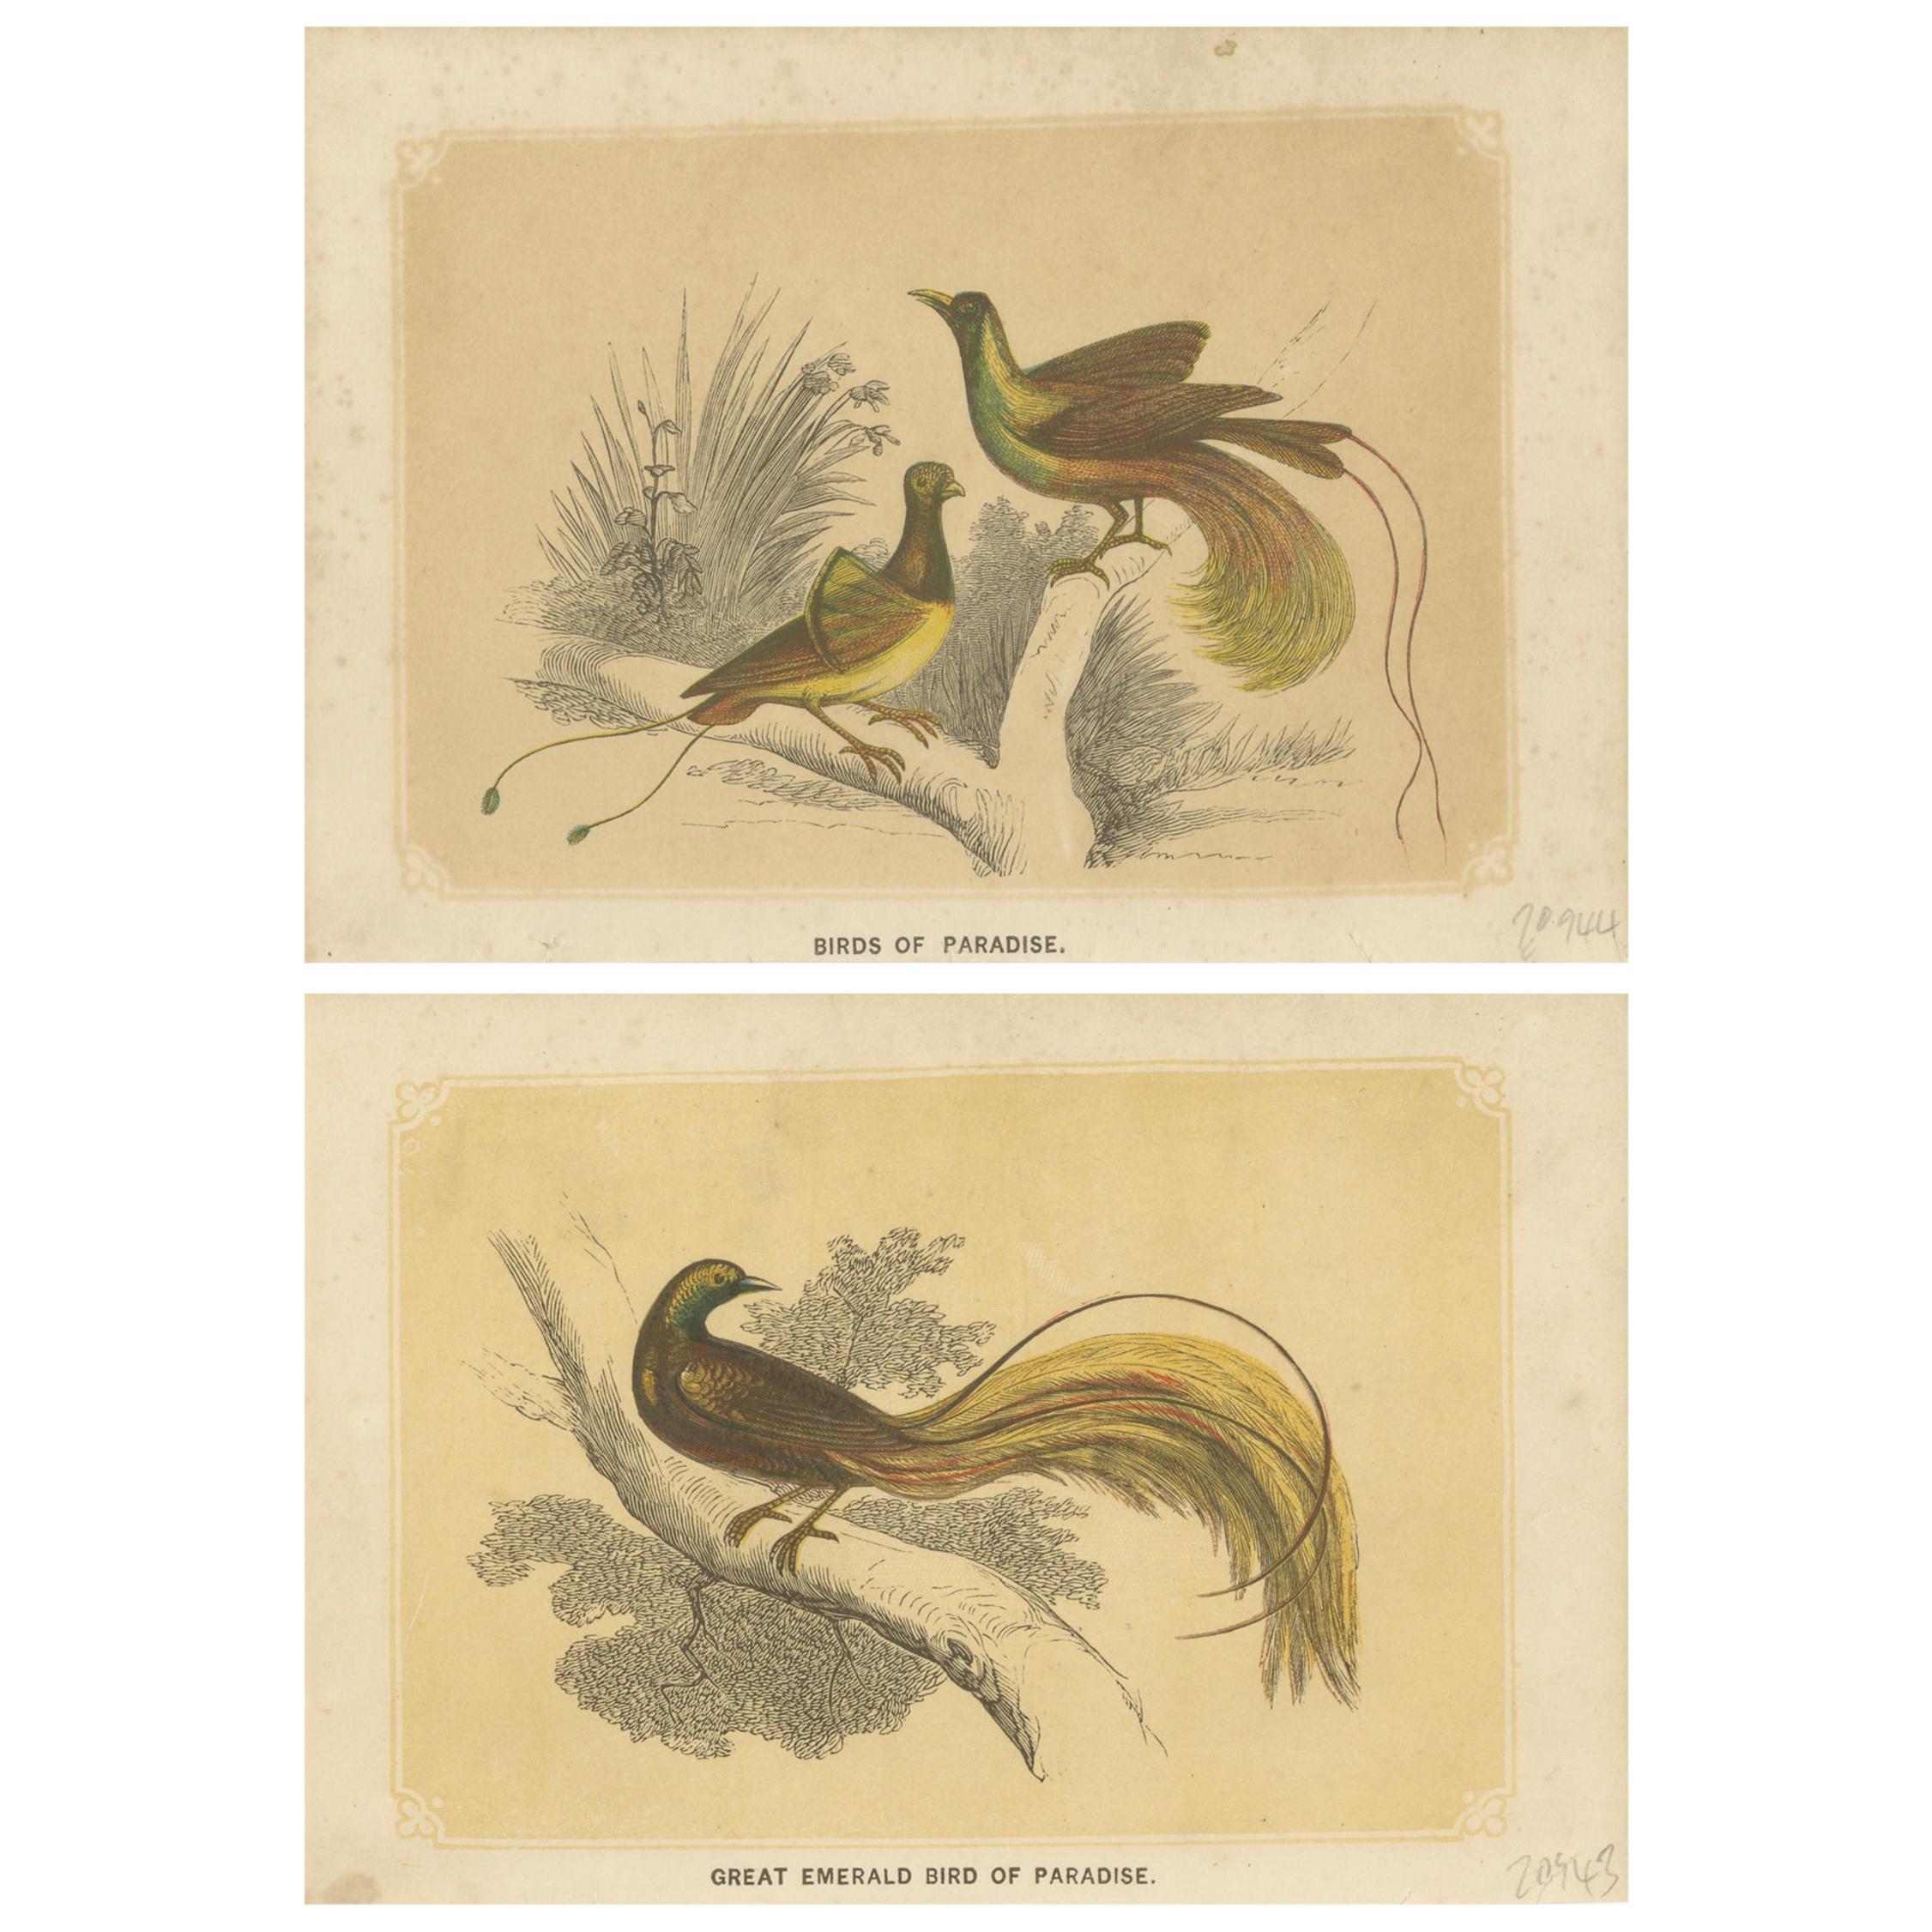 Set of 2 Antique Bird Prints, Bird of Paradise, by Bicknell 'circa 1855' For Sale